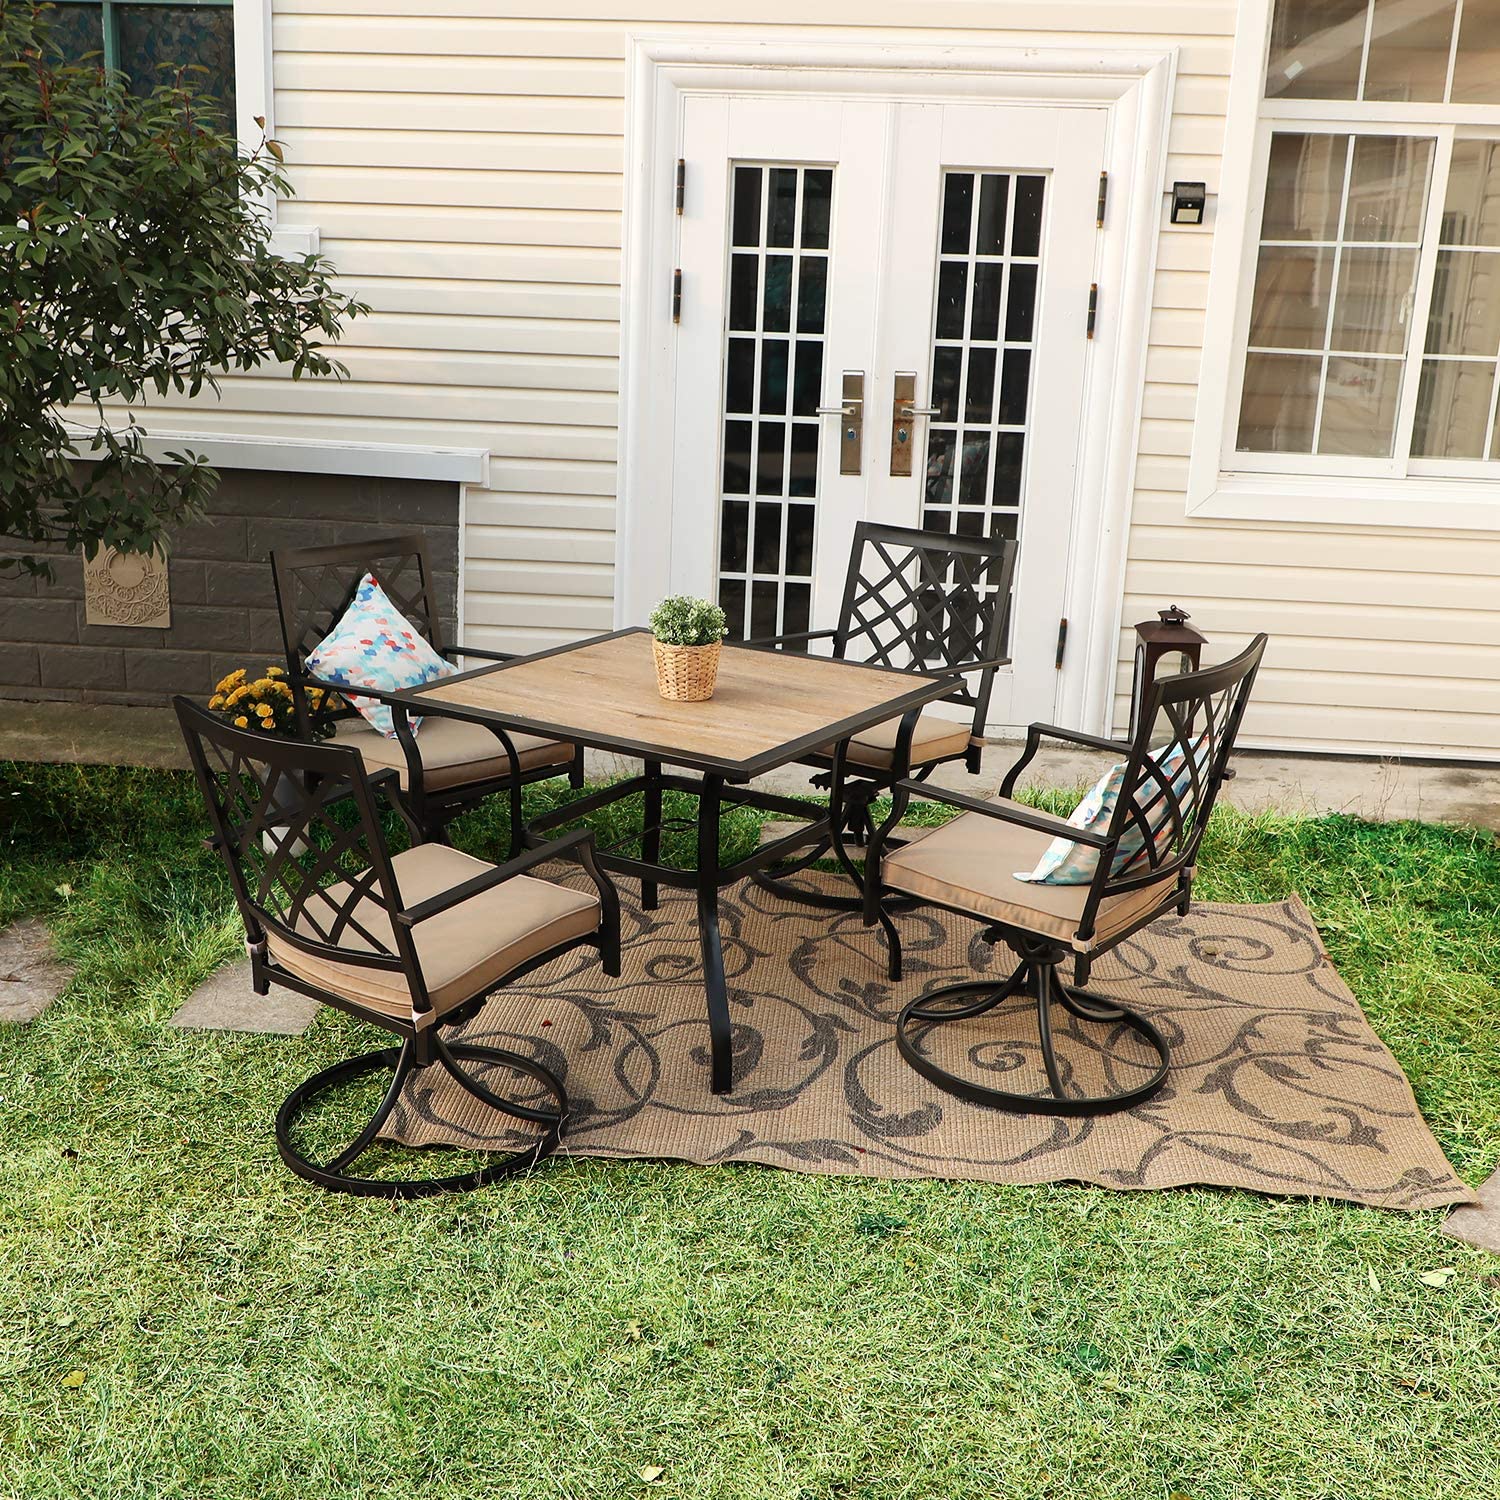 Sophia & William Black Frame Outdoor Dining Table with Umbrella Hole